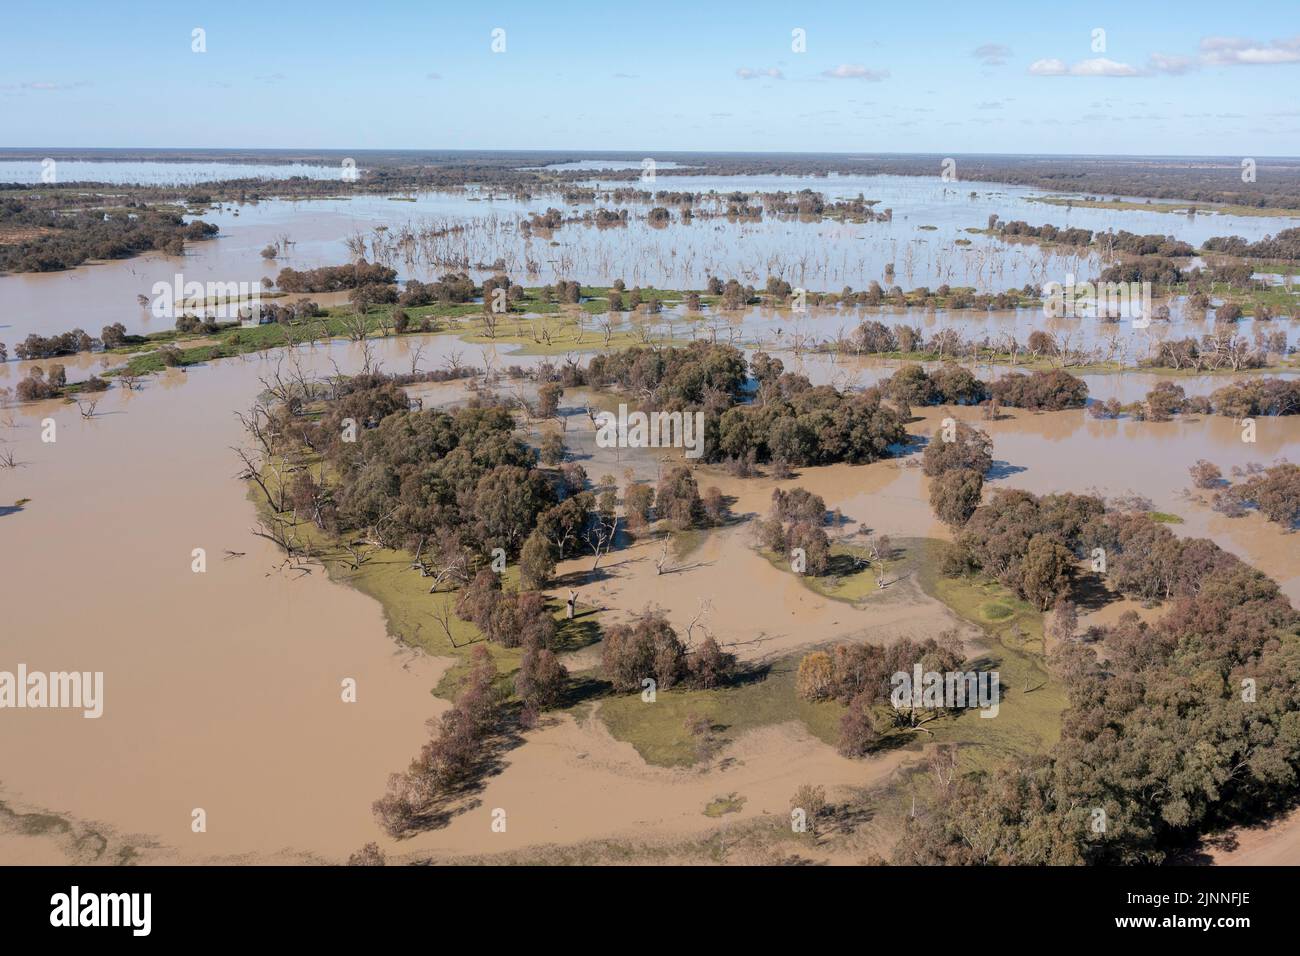 Flood waters from the Darling river fill Menindee lakes in the far west of New South Wales, Australia. Stock Photo